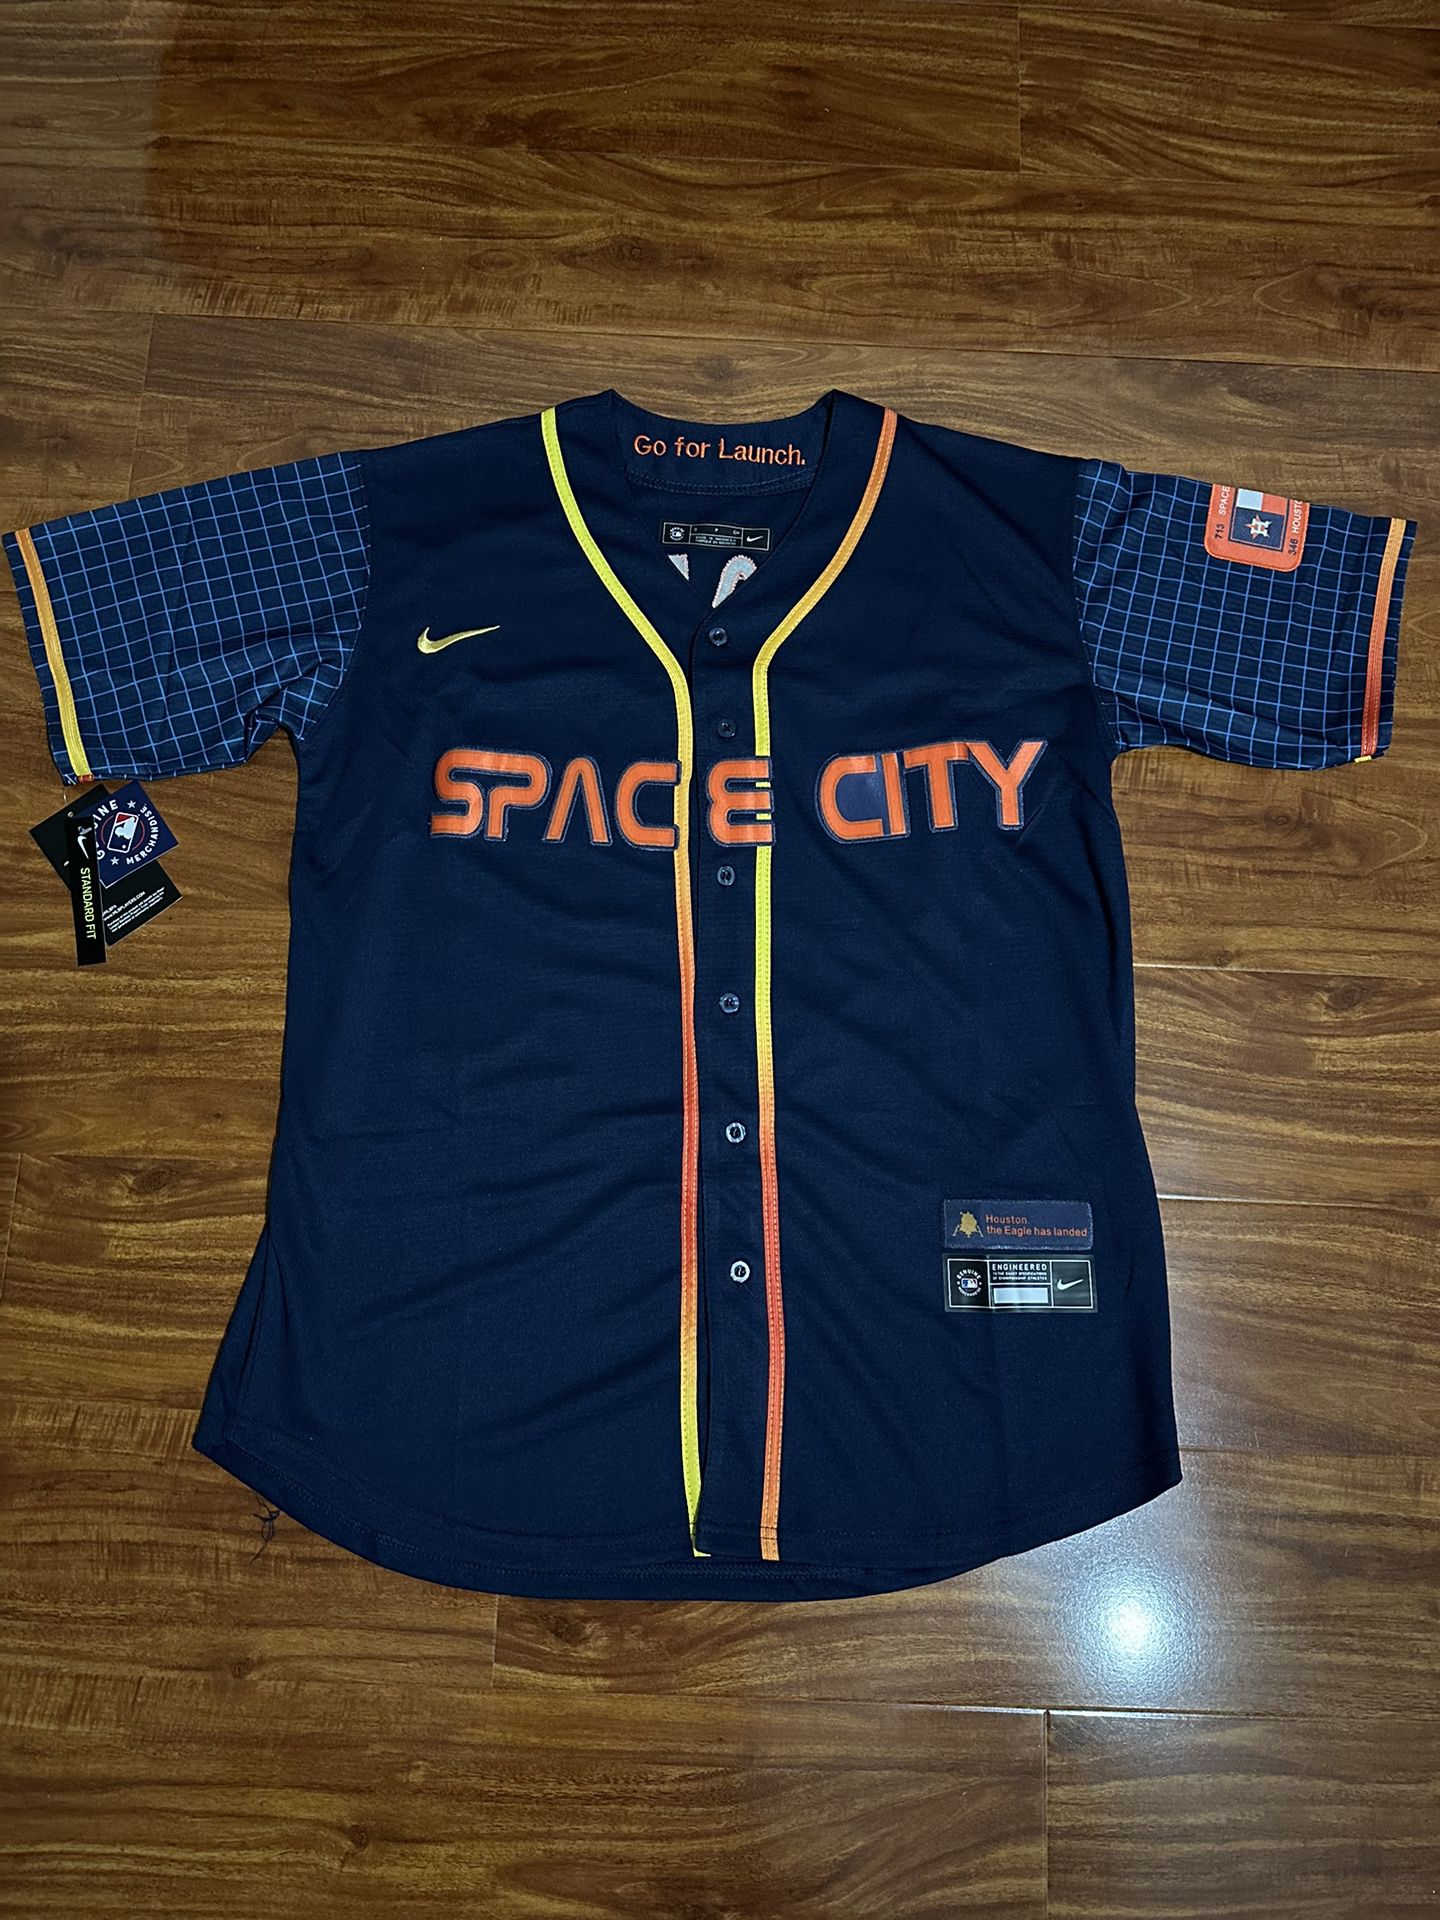 Columbia Houston Astros Space City Fishing shirt for Sale in Houston, TX -  OfferUp